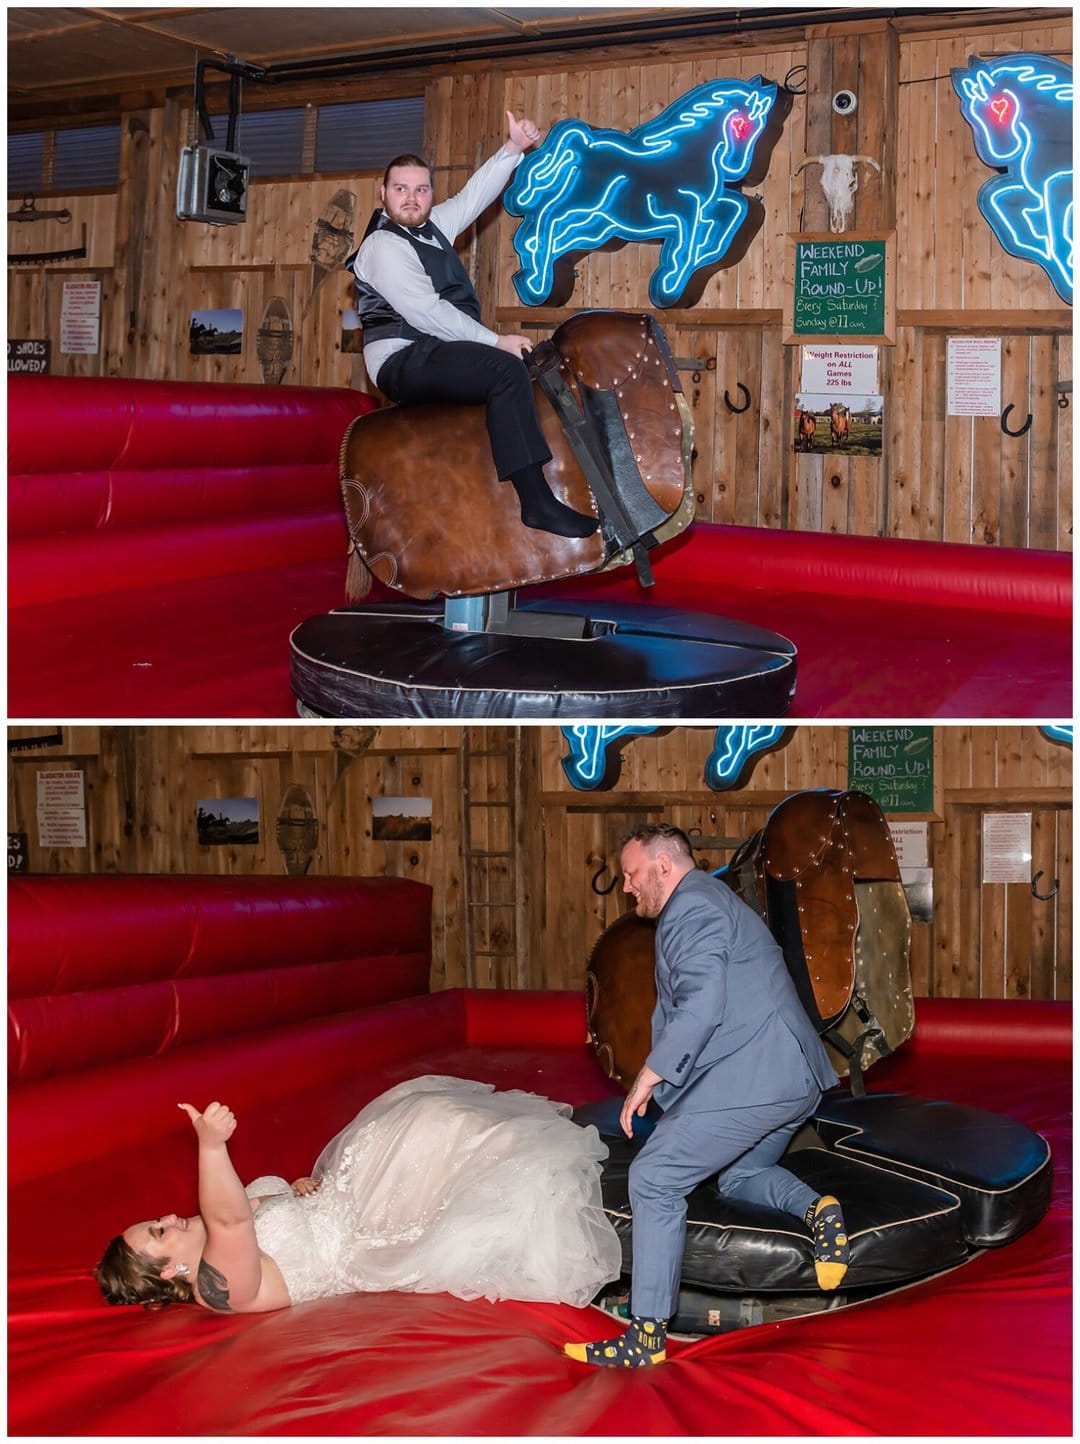 The bride and groom ride the electric bull at Hatfield Farm in Halifax, NS.